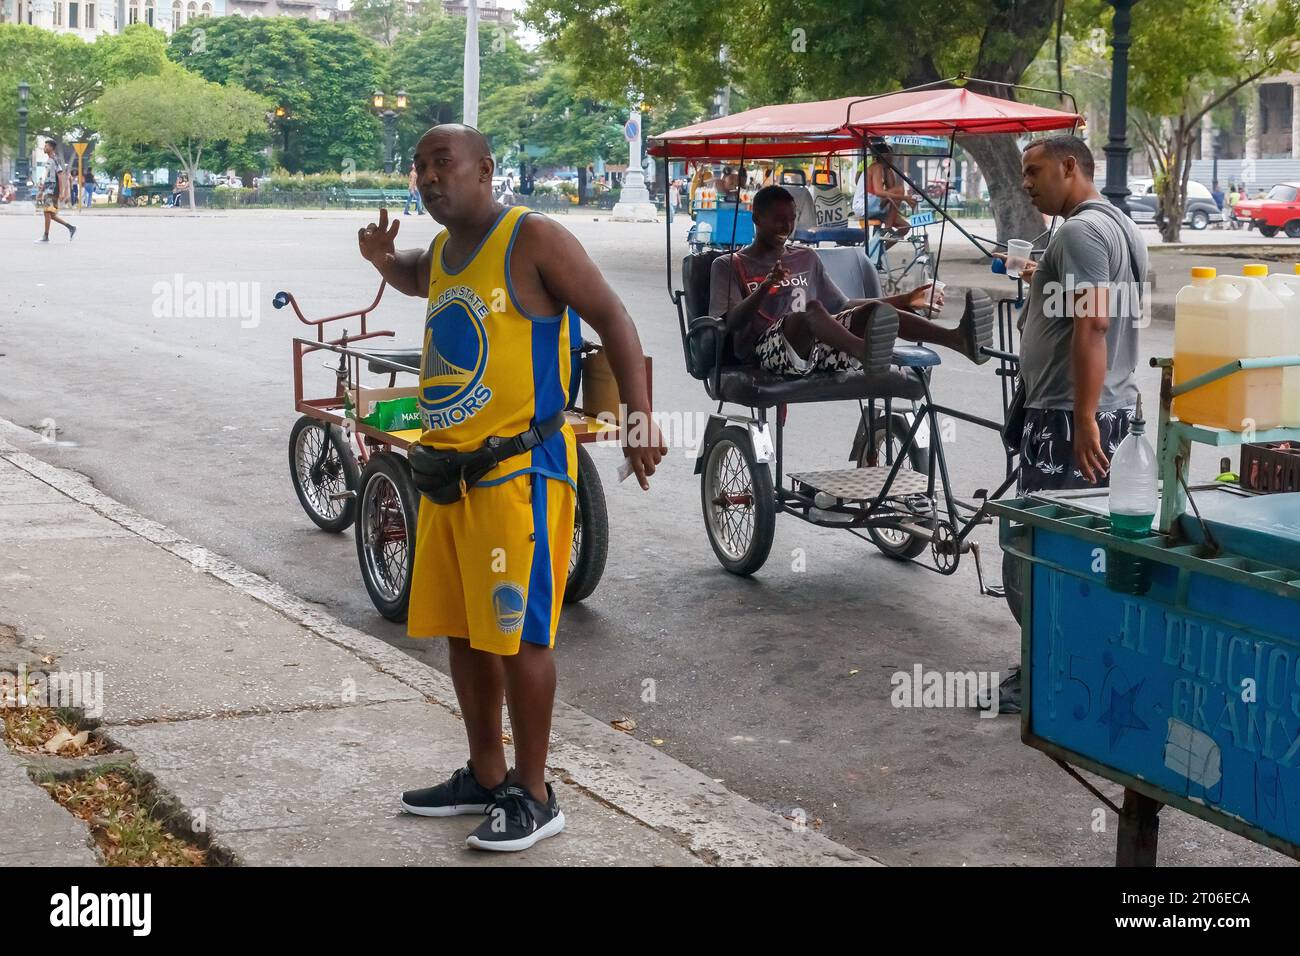 A Cuban man wearing sports clothes works selling flavored ice in the downtown district. Candid portrait of real people in street settings. Stock Photo